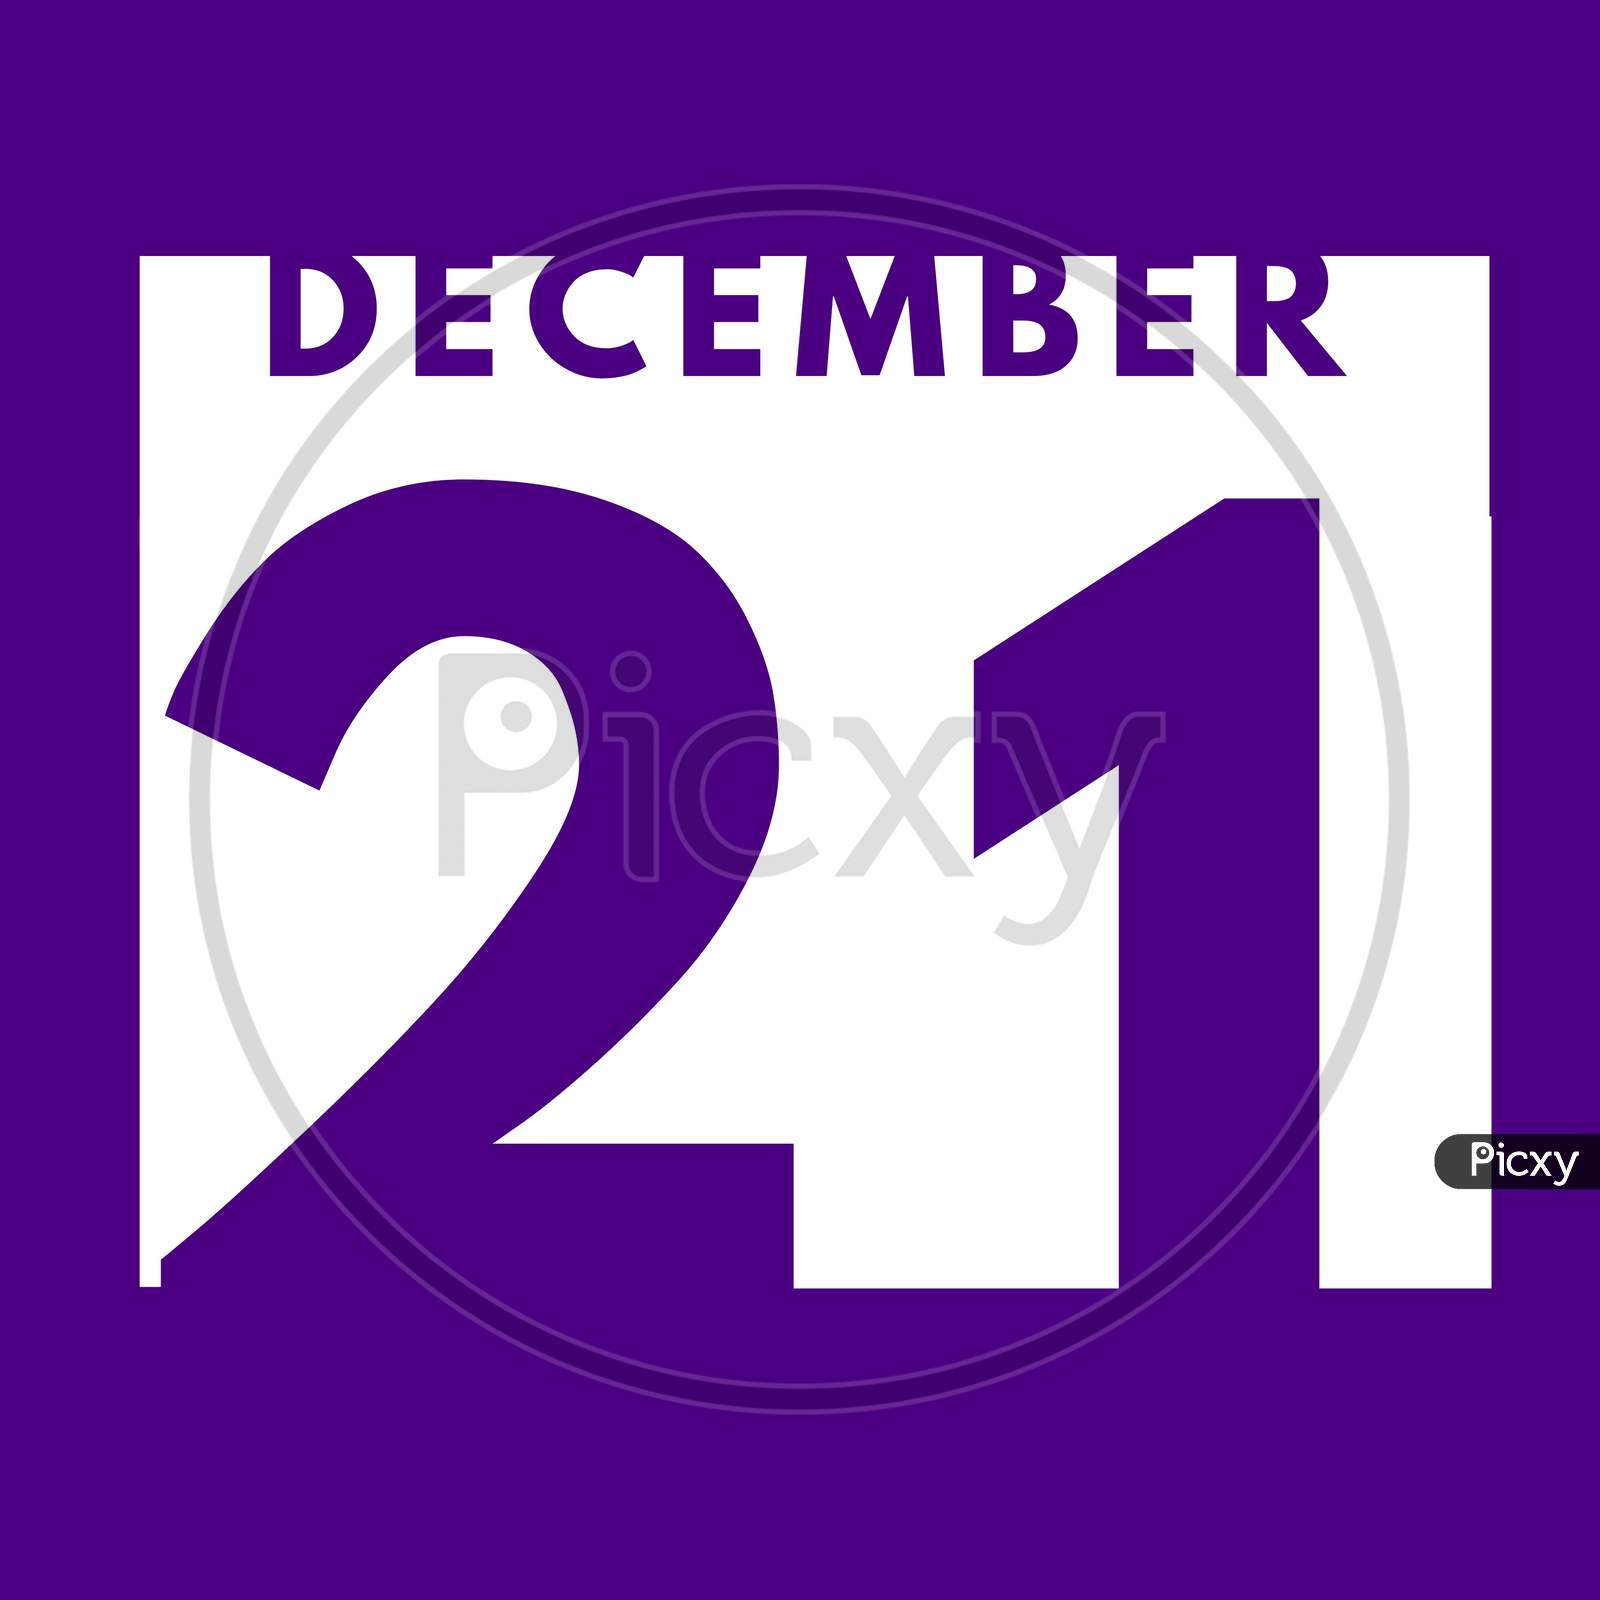 December 21 . Flat Modern Daily Calendar Icon .Date ,Day, Month .Calendar For The Month Of December